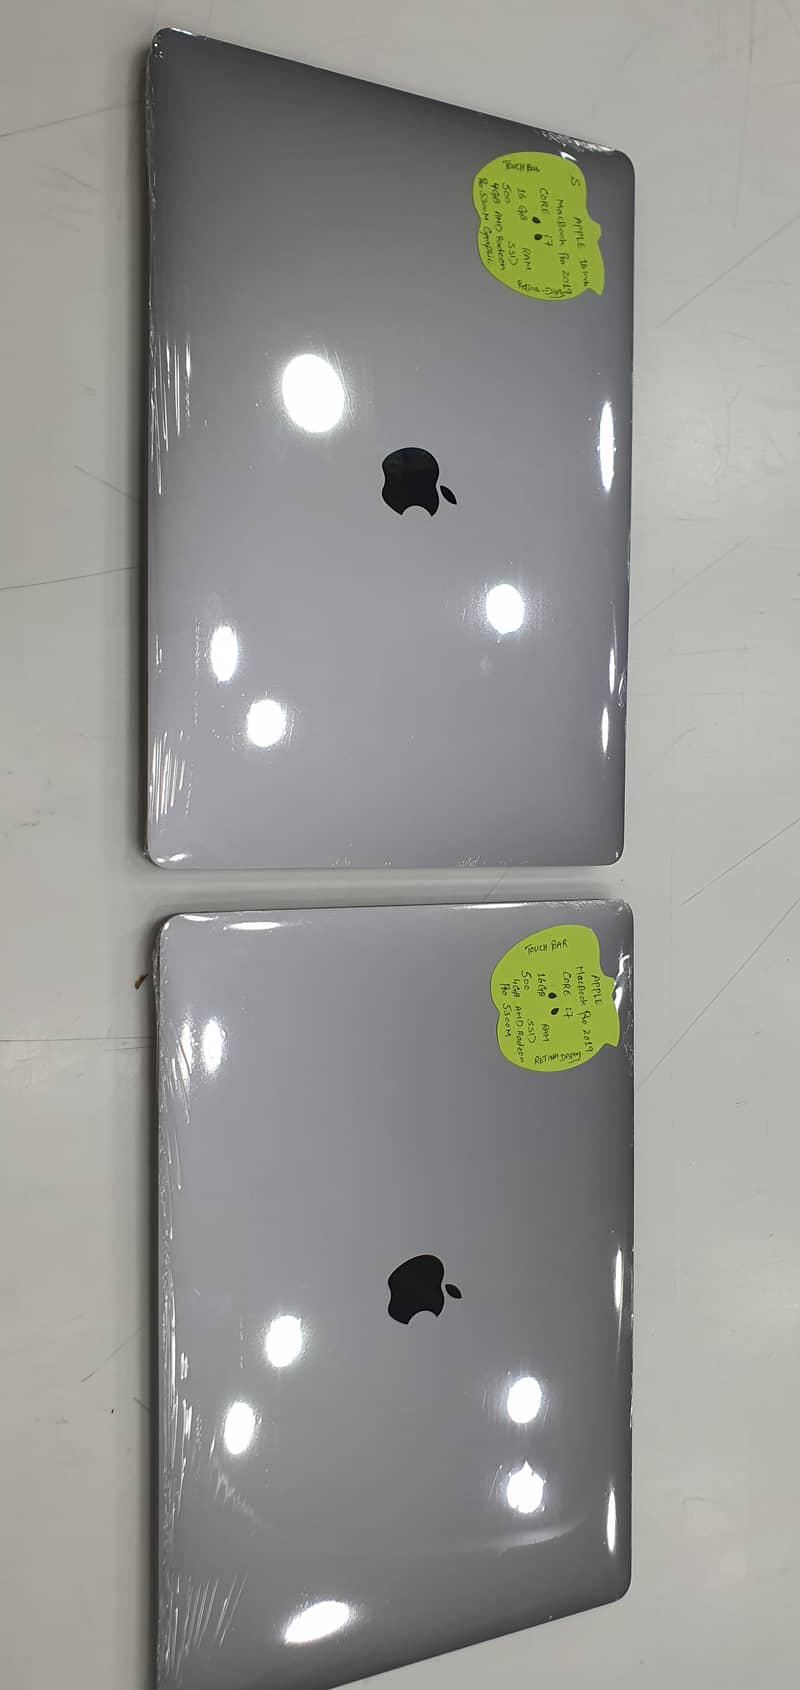 Apple Macbook Pro 2019 16'inches with Retina Display Touchbar for sale 12